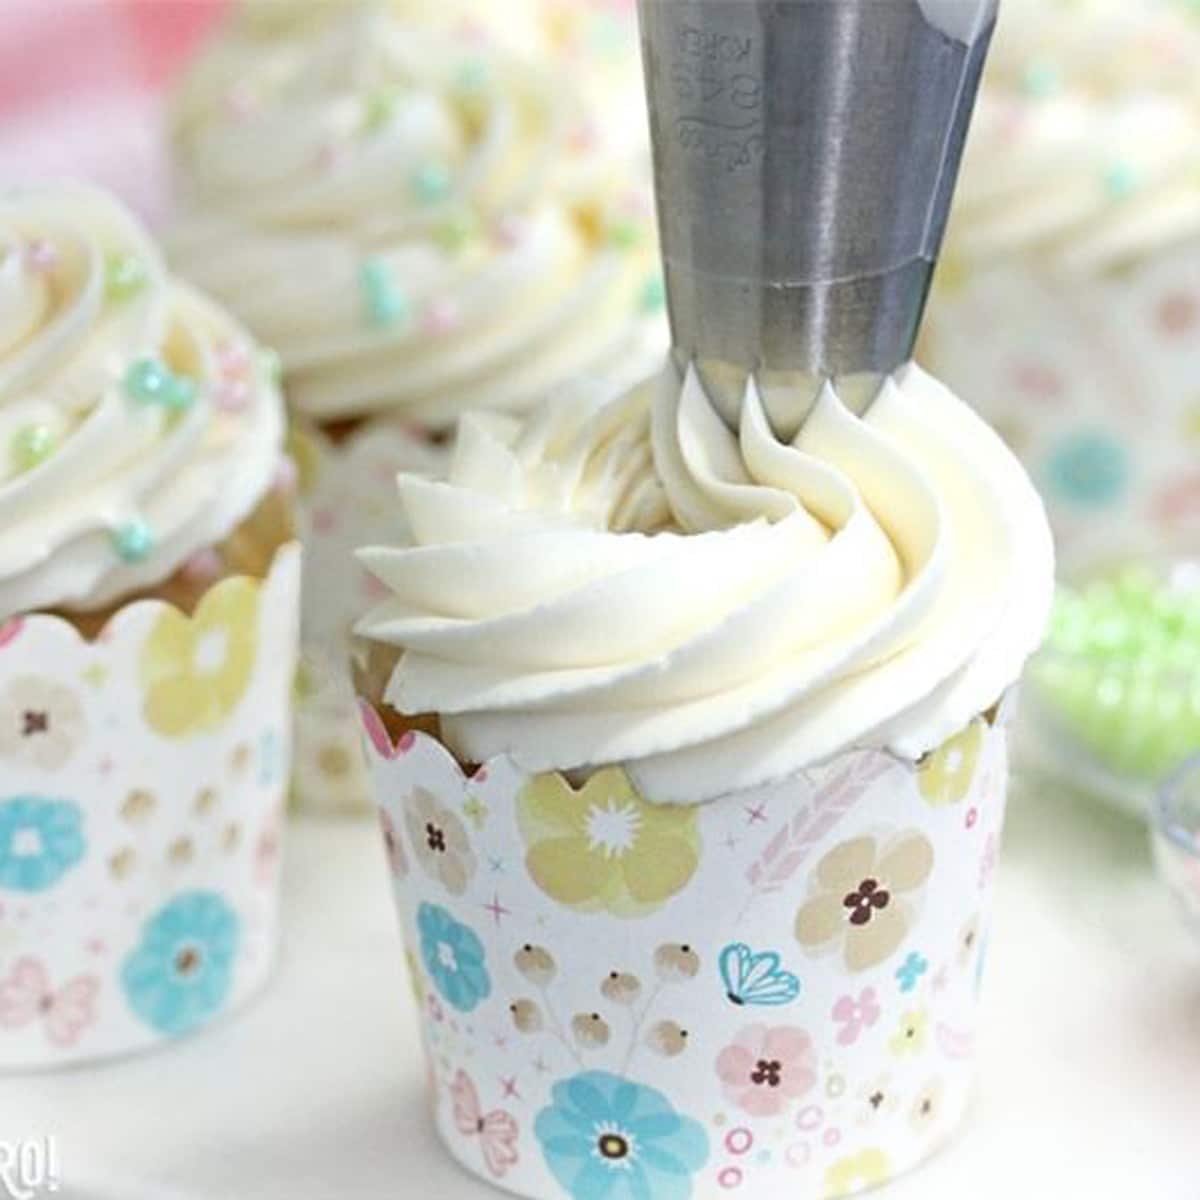 A swirl of the Easiest Swiss Meringue Buttercream being piped onto a cupcake.